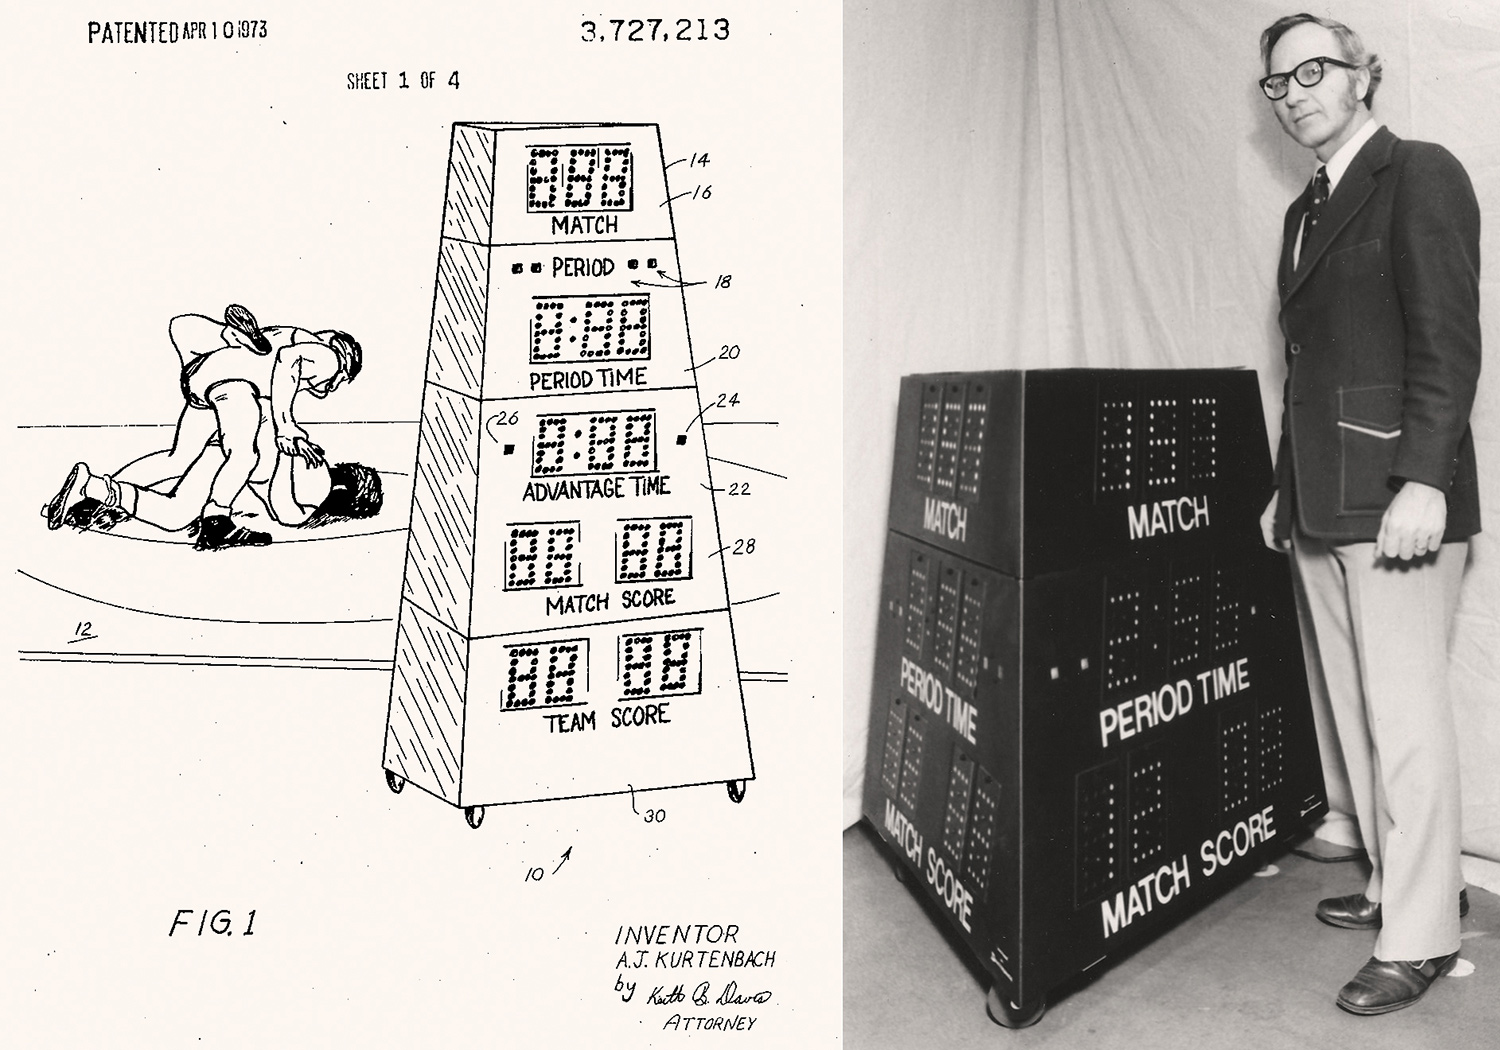 Left image: United States patent number 3,727,213 drawing of Matside wrestling scoreboard with drawing of two wrestlers wrestling 1973. Right image: Al Kurtenbach in suit and tie standing next to Matside scoreboard device in the 1970s. Photo courtesy of Daktronics.